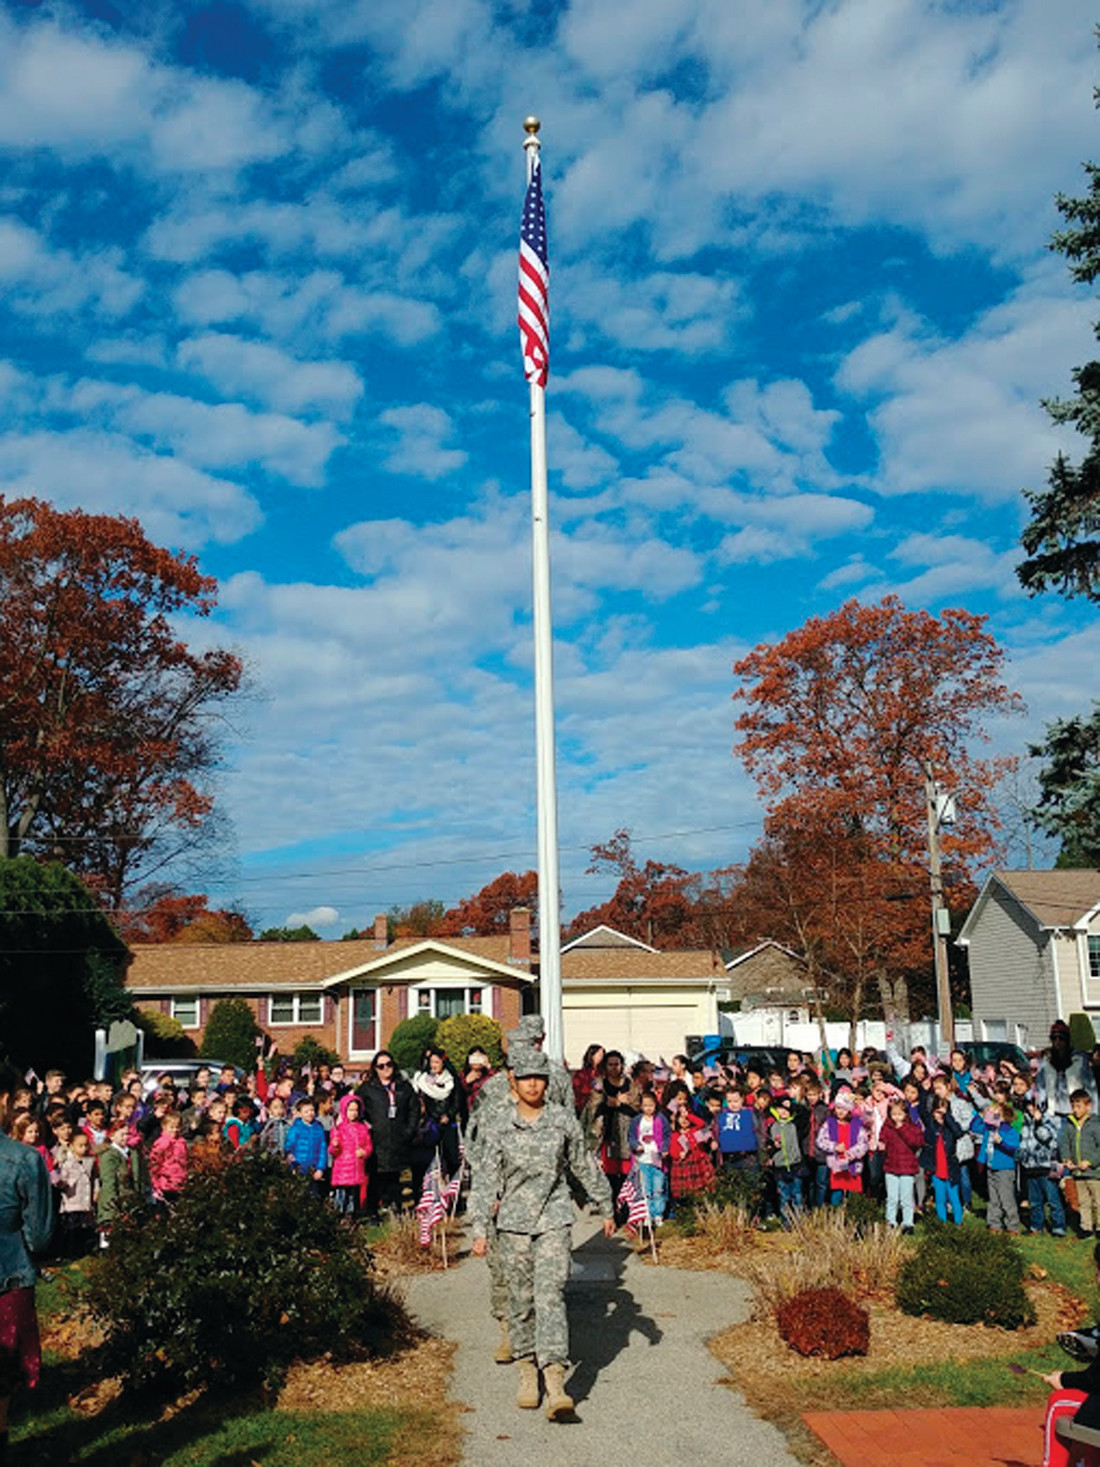 A JOB WELL DONE: The Cranston East JROTC students march out of the ceremony after having raised the new flag at Glen Hills Elementary School in honor of Veterans Day.